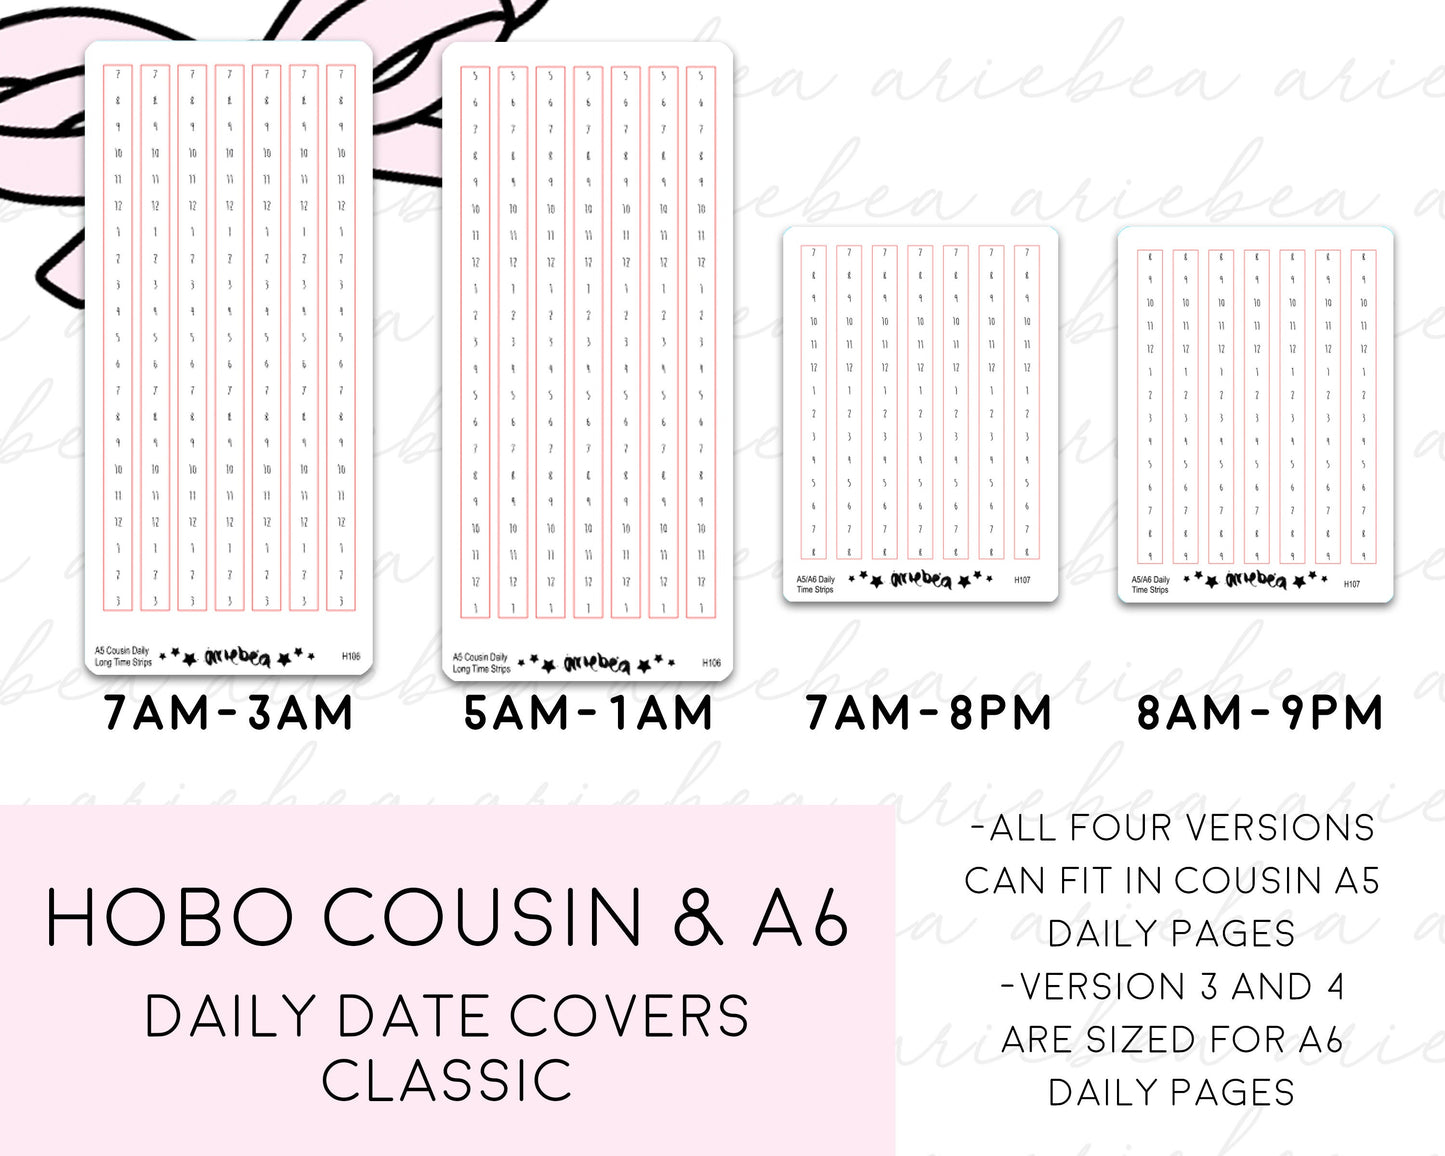 Hobonichi Cousin & Hobonichi A6 Original Daily Time Strips Planner Stickers